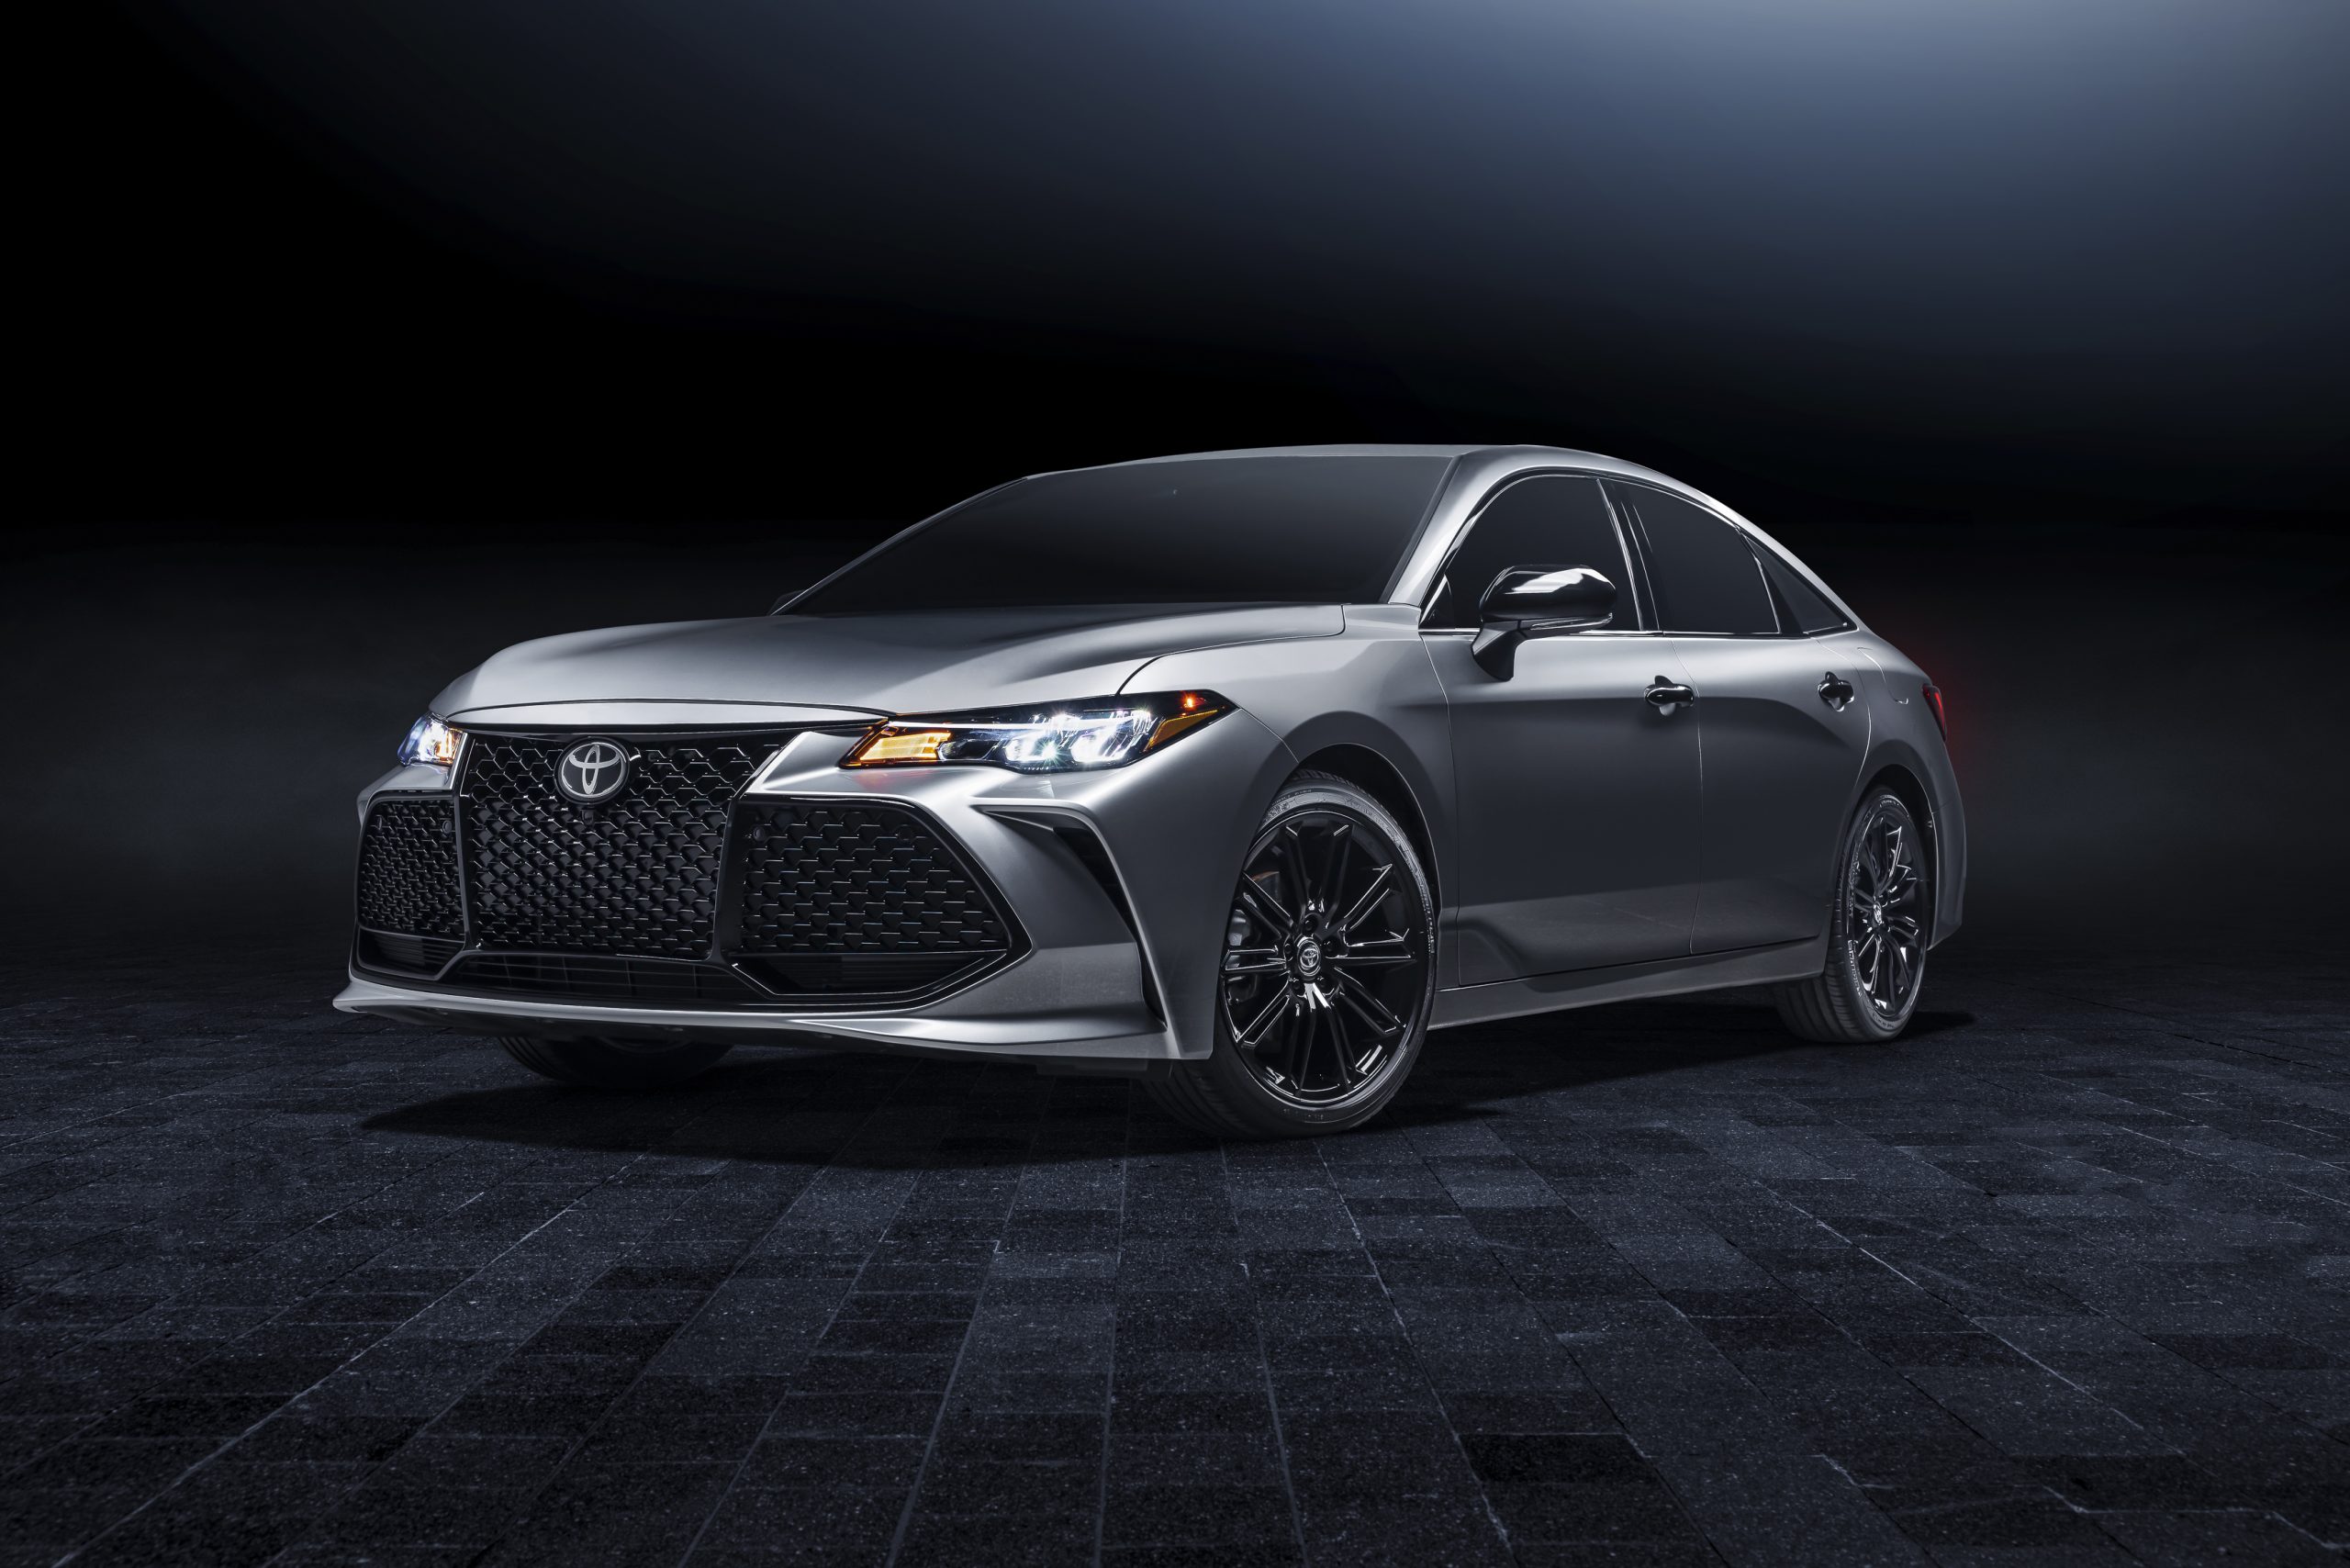 The 2021 Toyota Avalon features a new a bold Nightshade Edition trim.